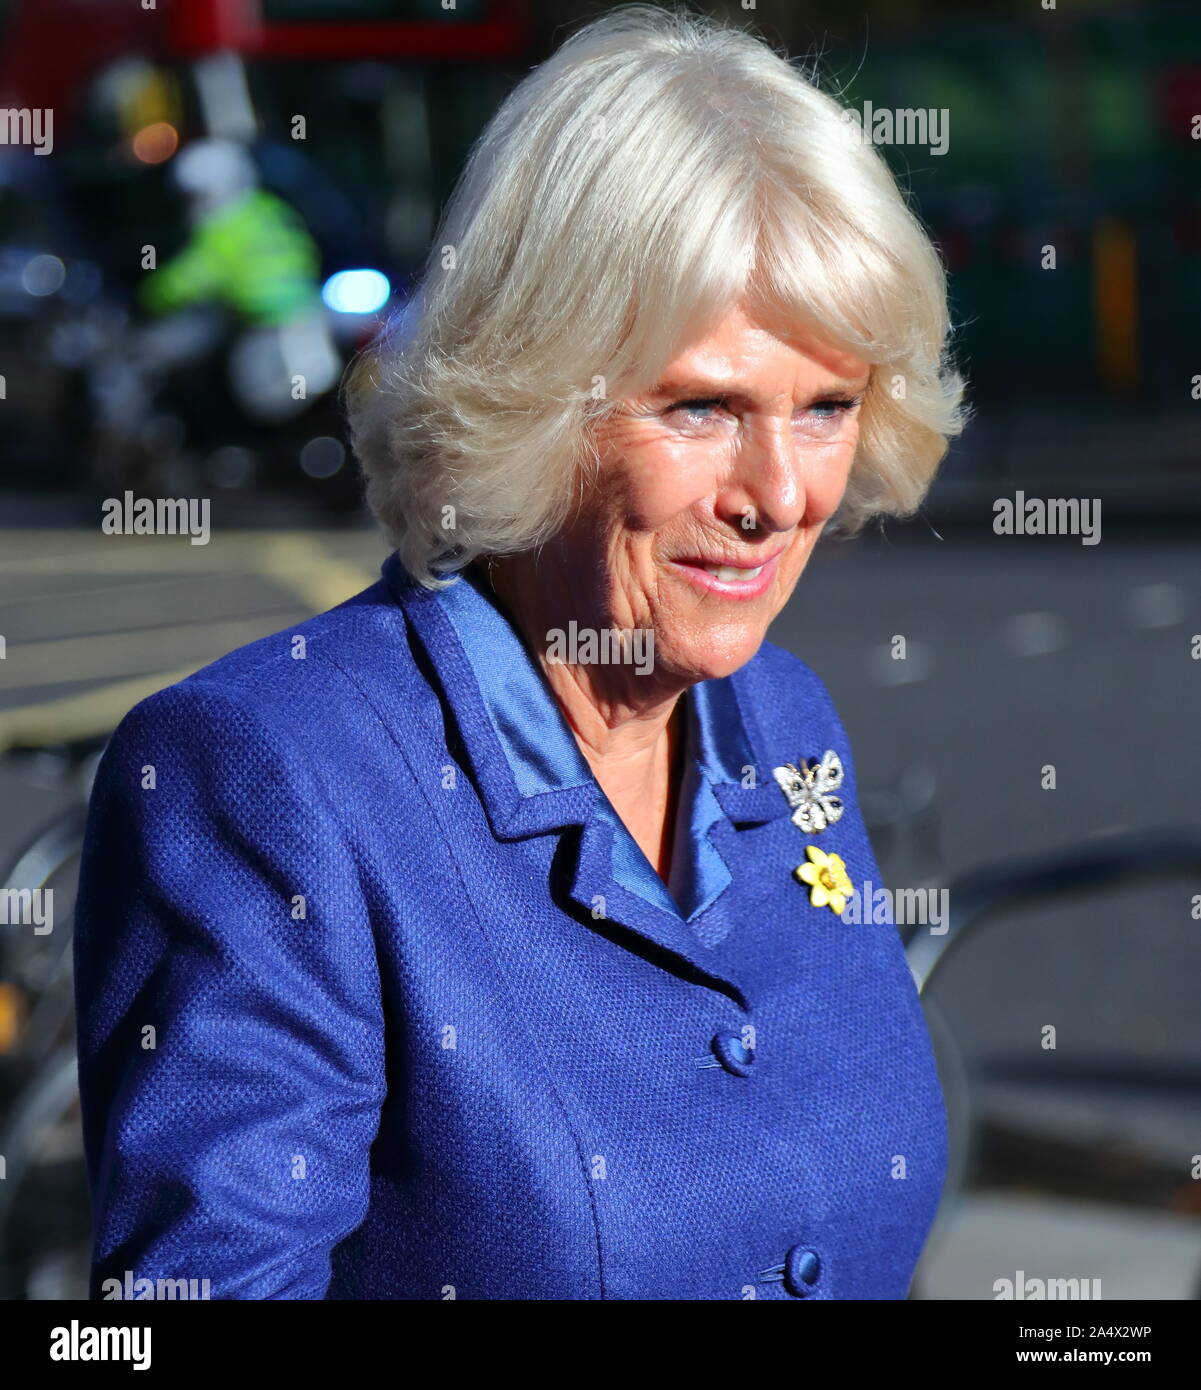 London, UK, 16th Oct 2019, The Duchess of Cornwall leaves the Poetry Together Charity event. Credit: Uwe Deffner / Alamy Live News Stock Photo